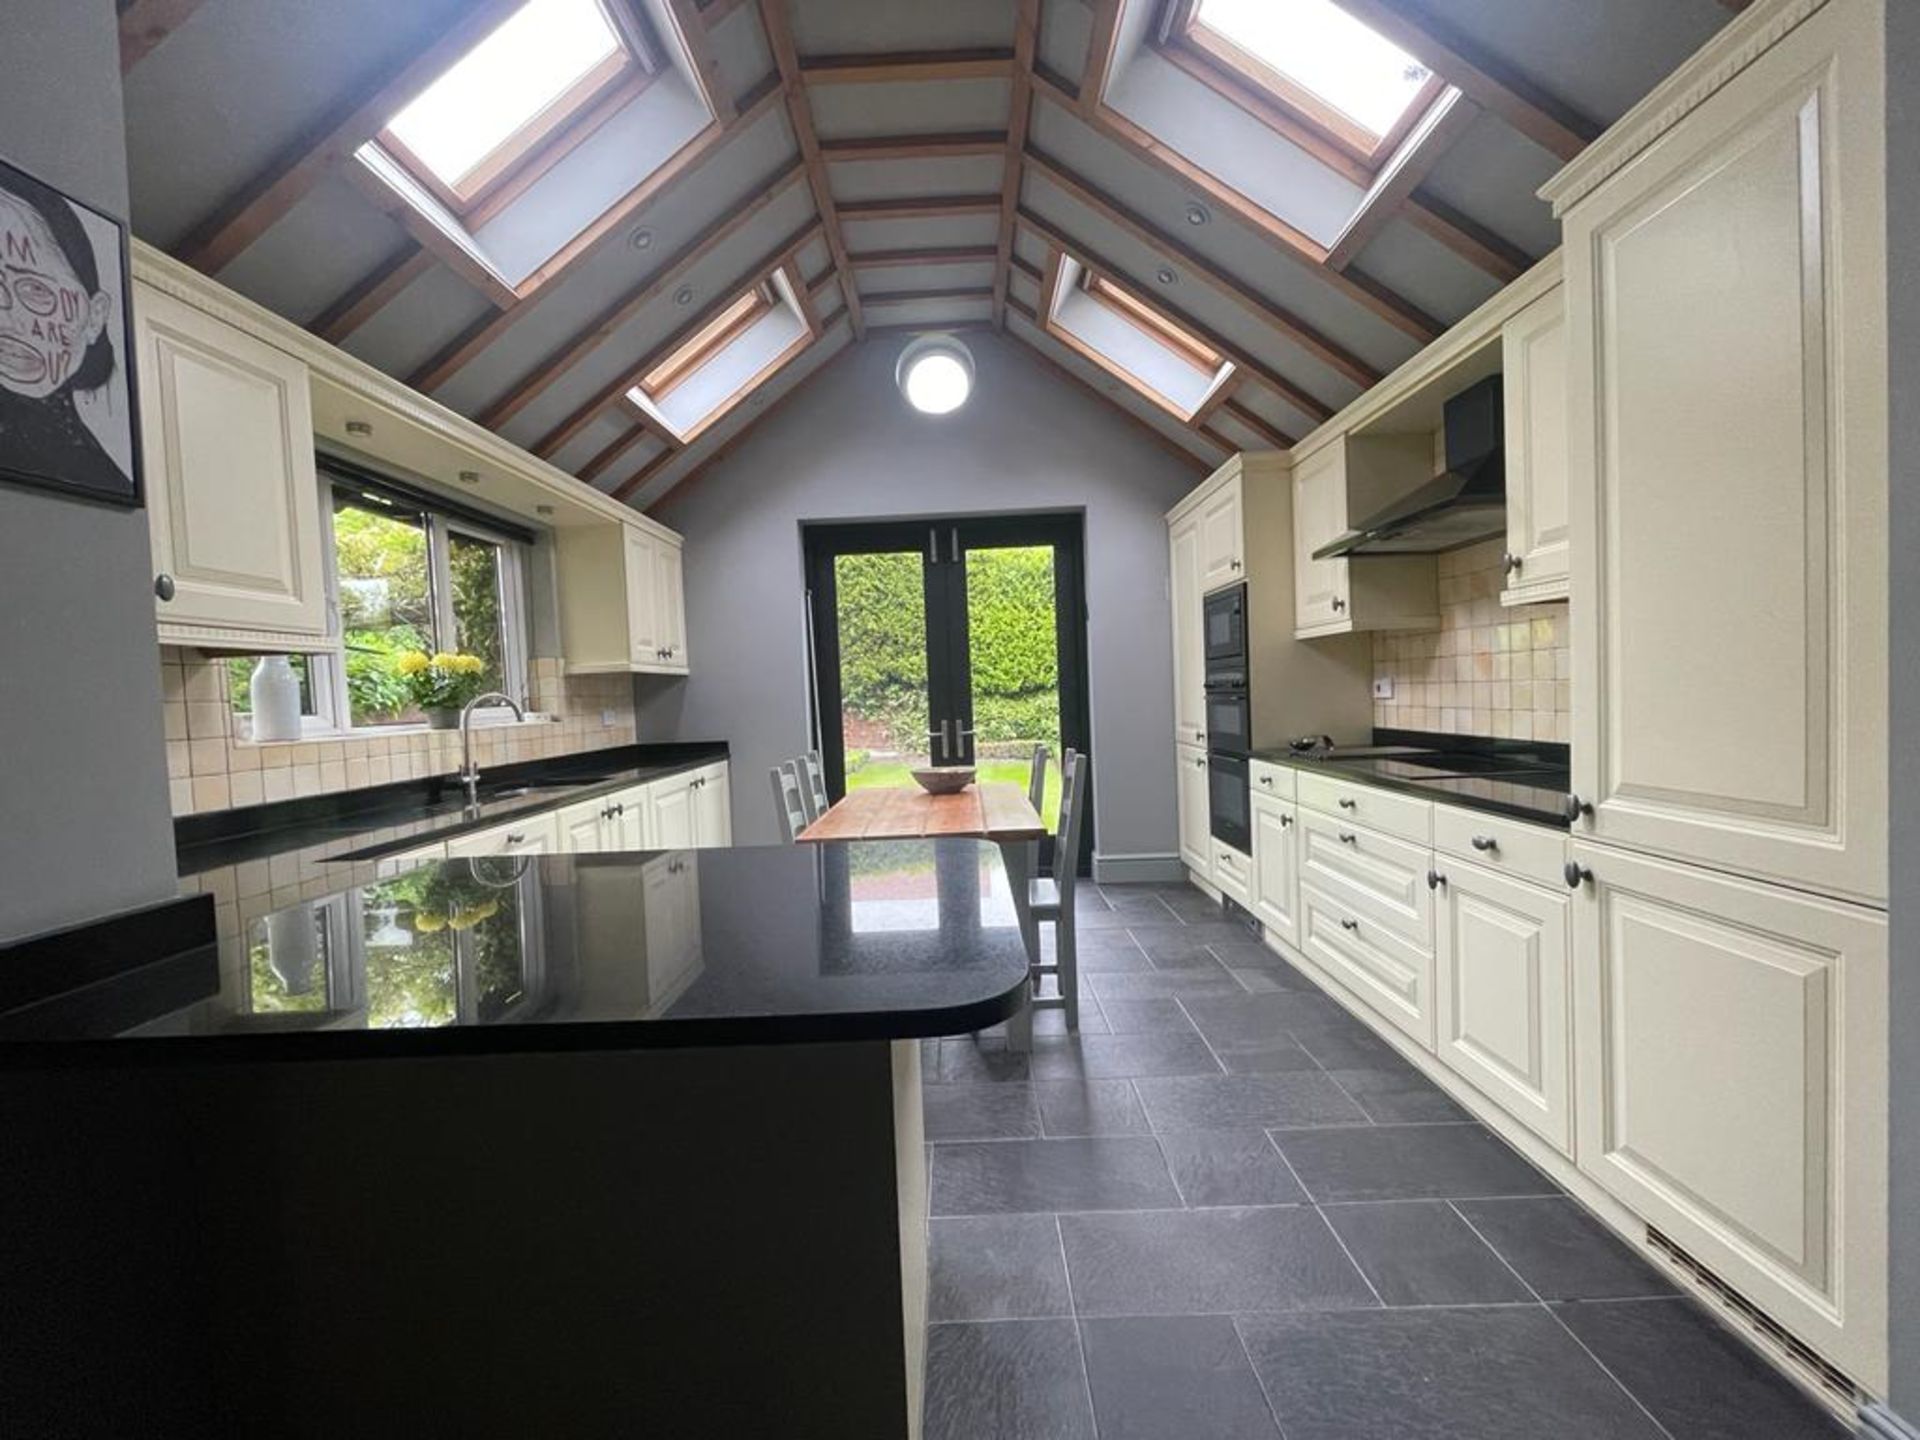 1 x Bespoke Keller Kitchen With Branded Appliances - From An Exclusive Property - No VAT On The - Image 7 of 127